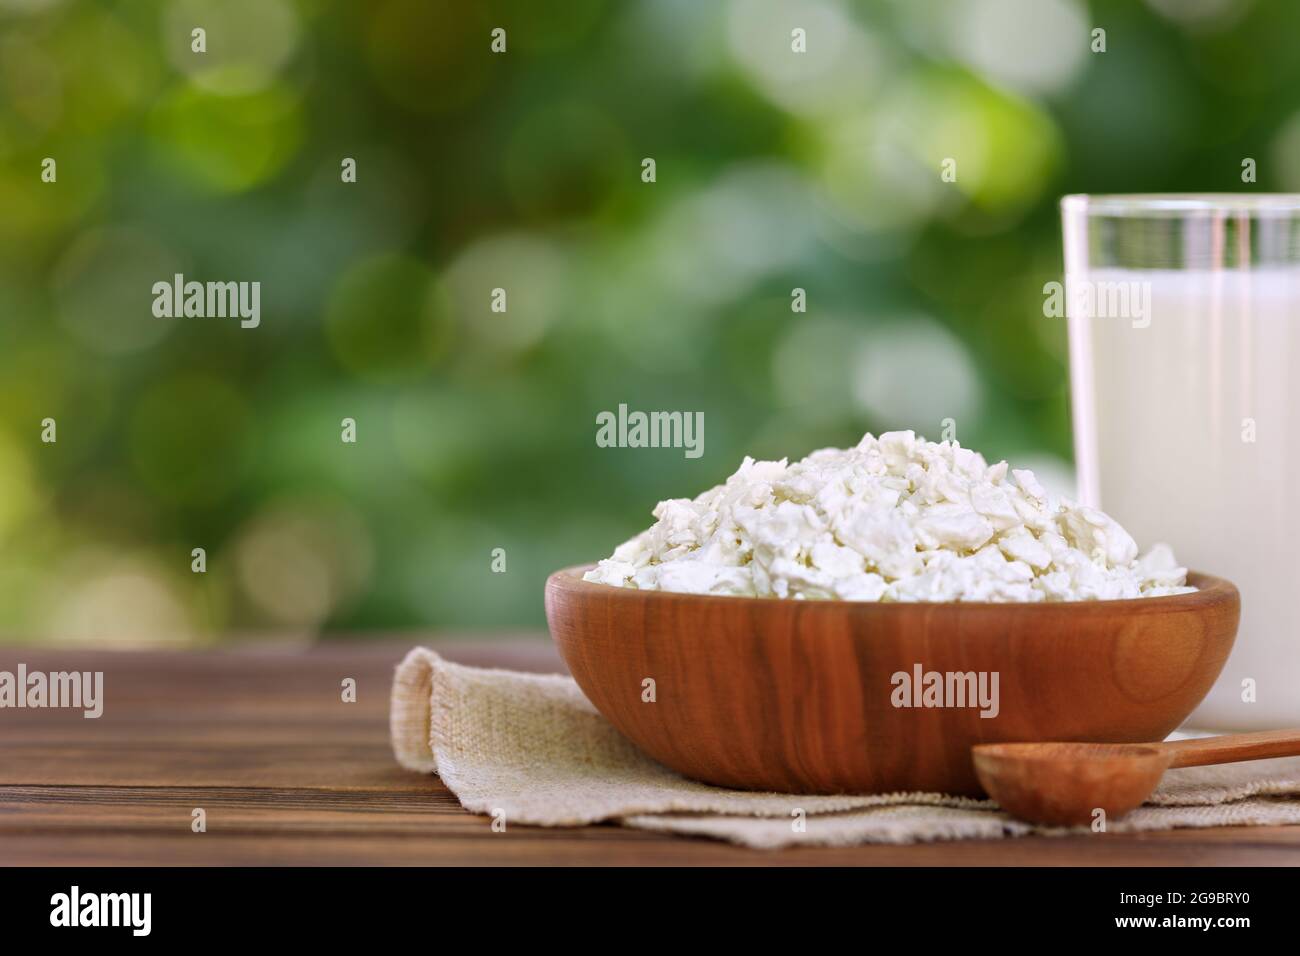 yogurt and cottage cheese on table outdoors Stock Photo